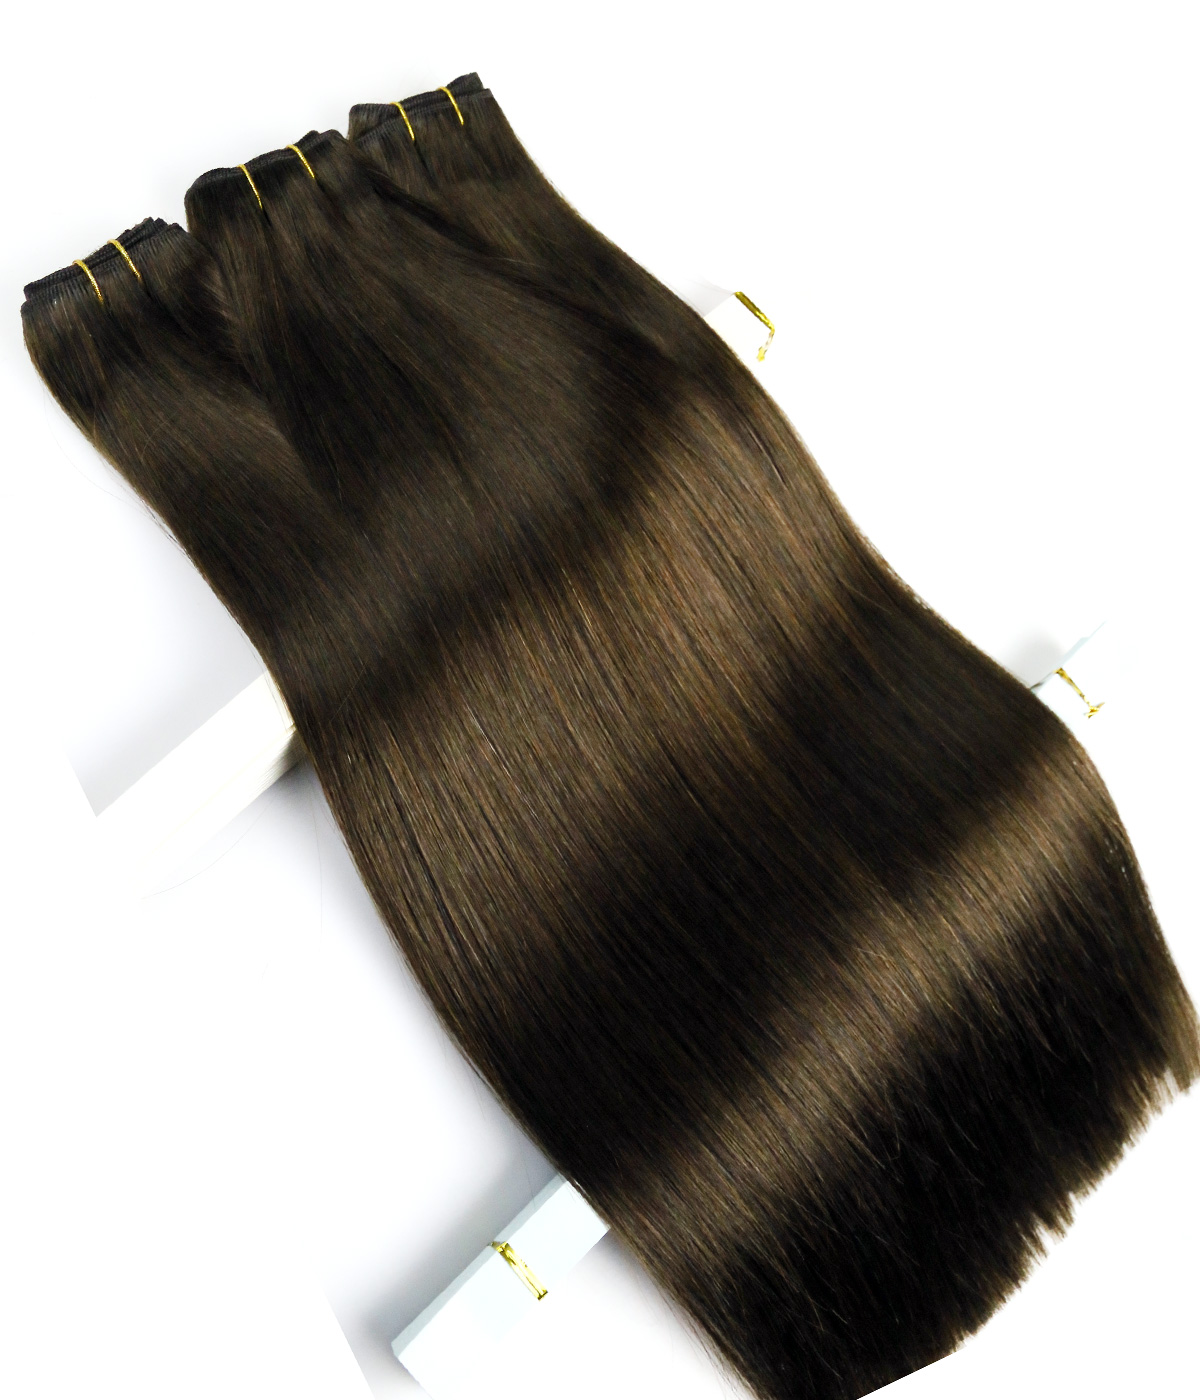 Delux Machine Weft 100% Virgin Human Hair Extensions for Pro 100g